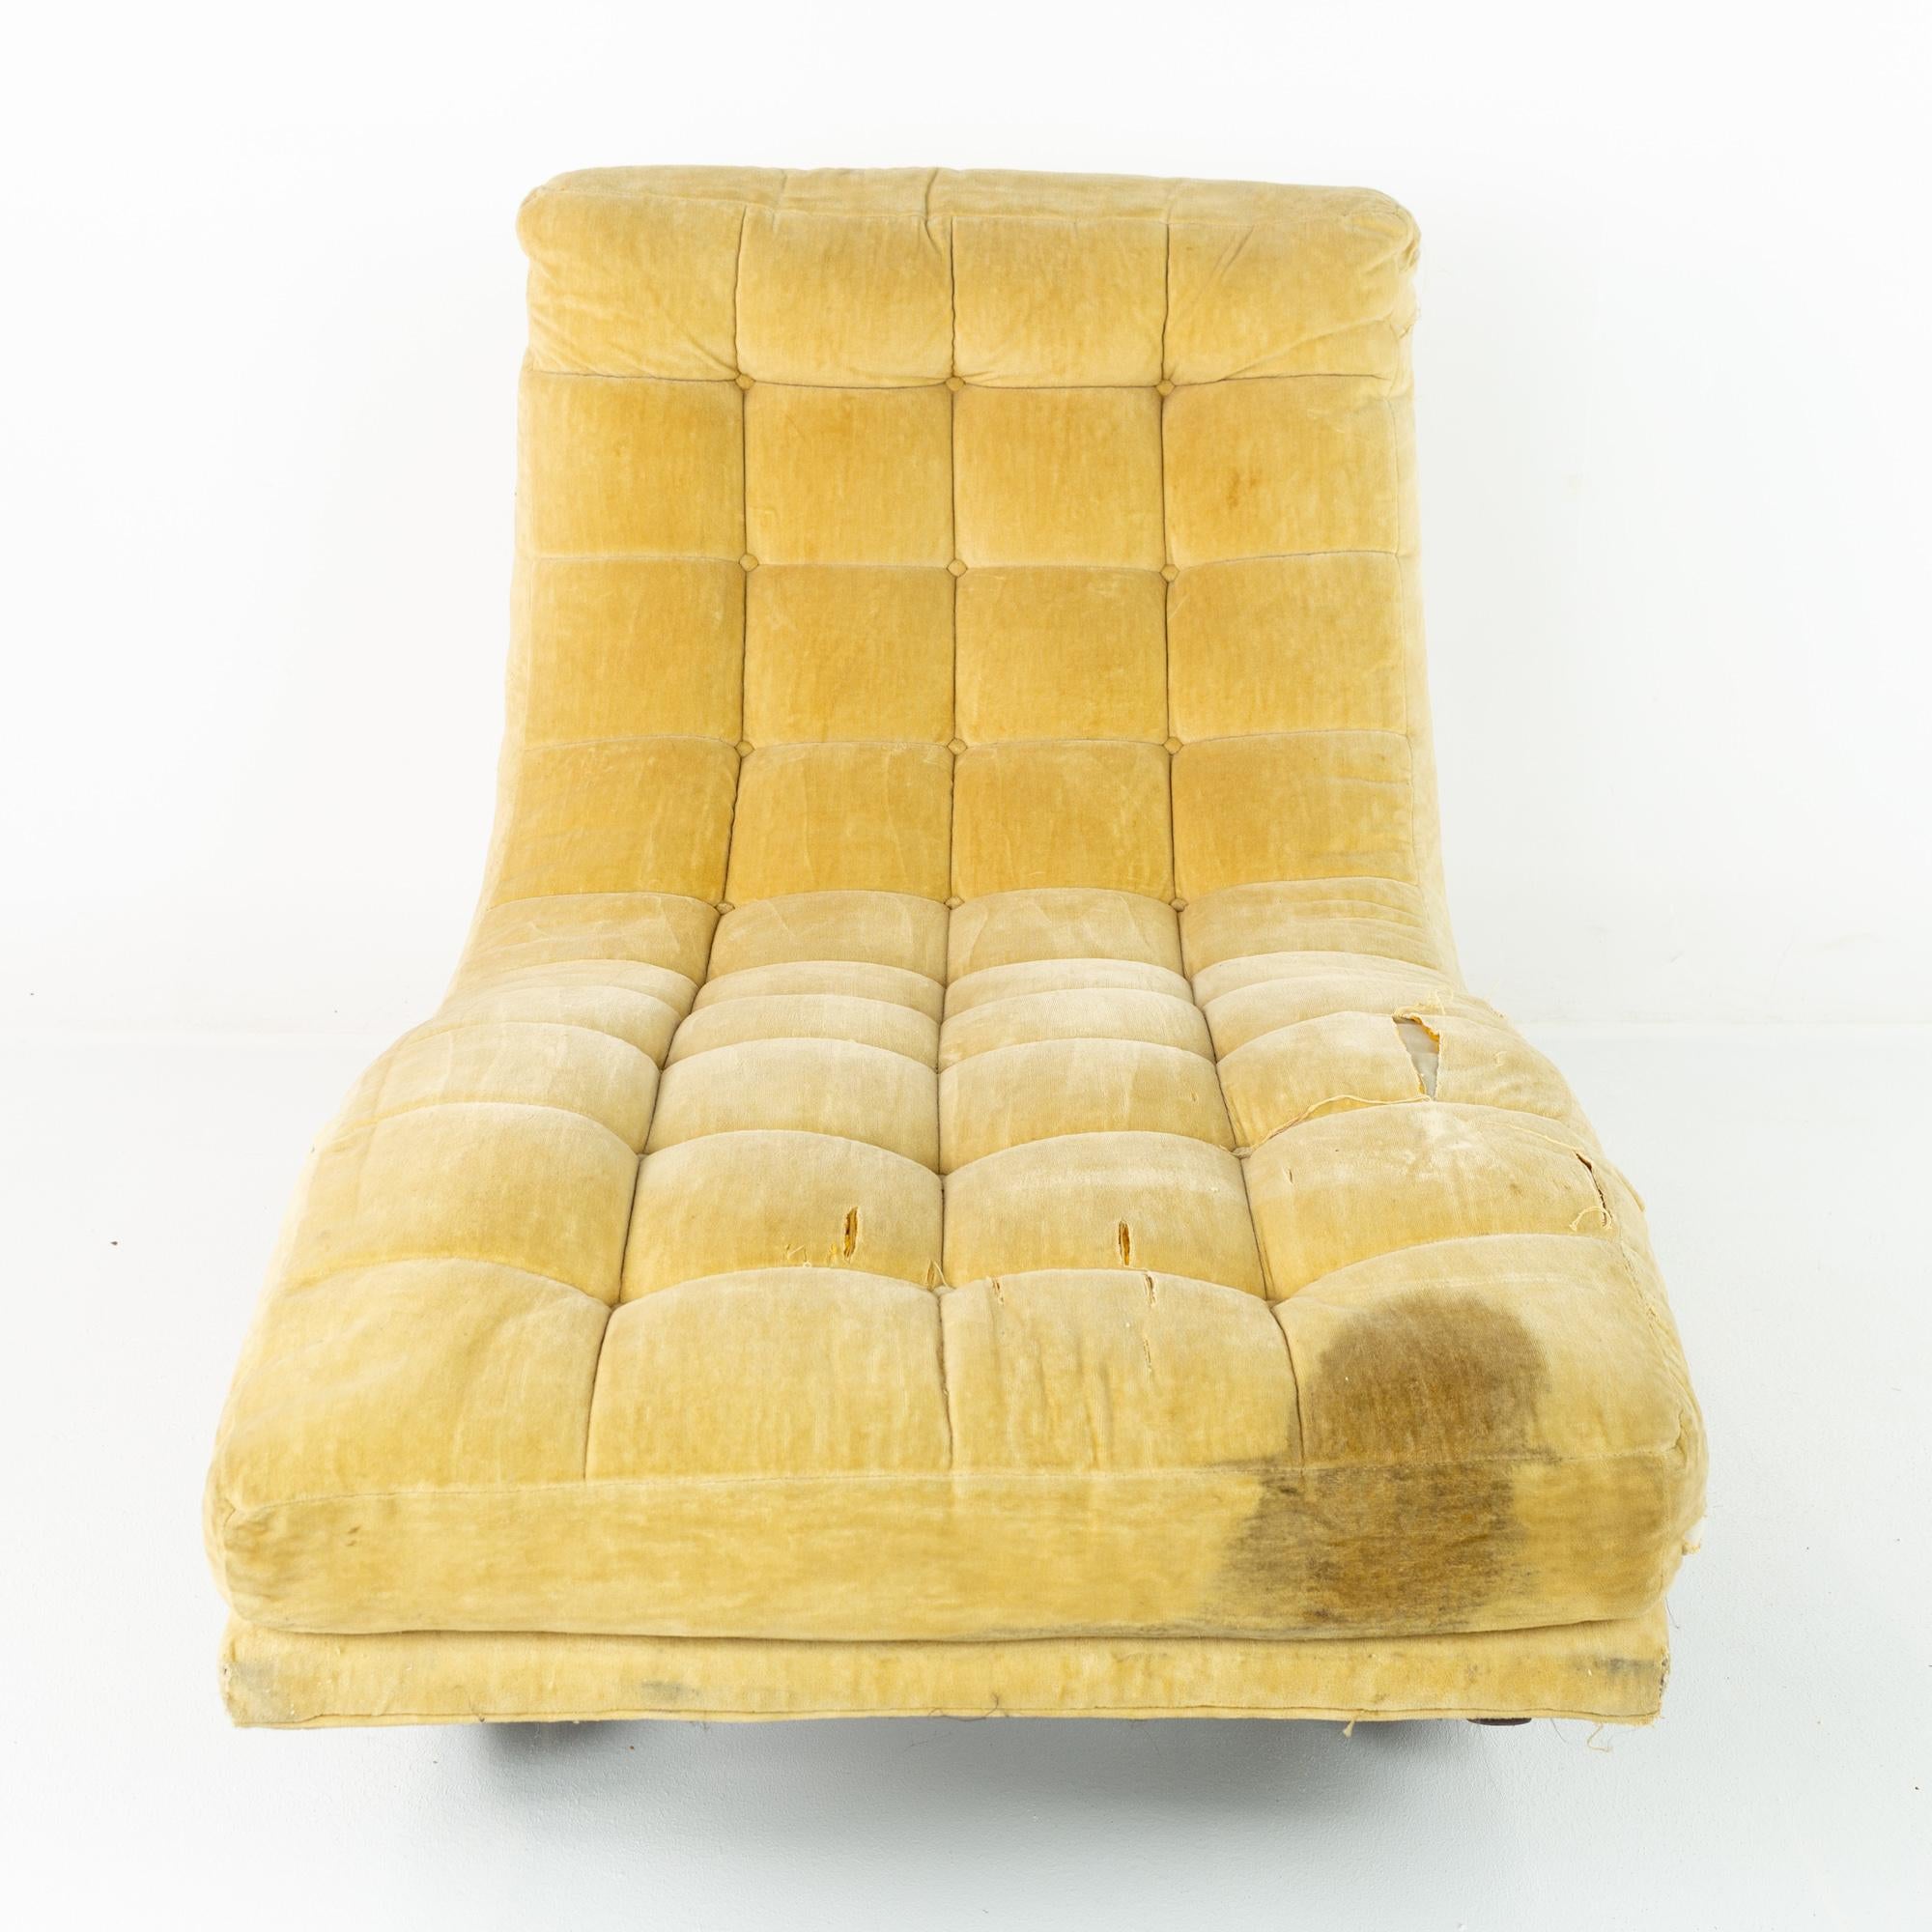 Adrian Pearsall for Craft Associates mid century rocking chaise lounge chair

This chair measures: 30.5 wide x 63 deep x 34.25 inches high, with a seat height of 17 inches

Ready for new upholstery

?All pieces of furniture can be had in what